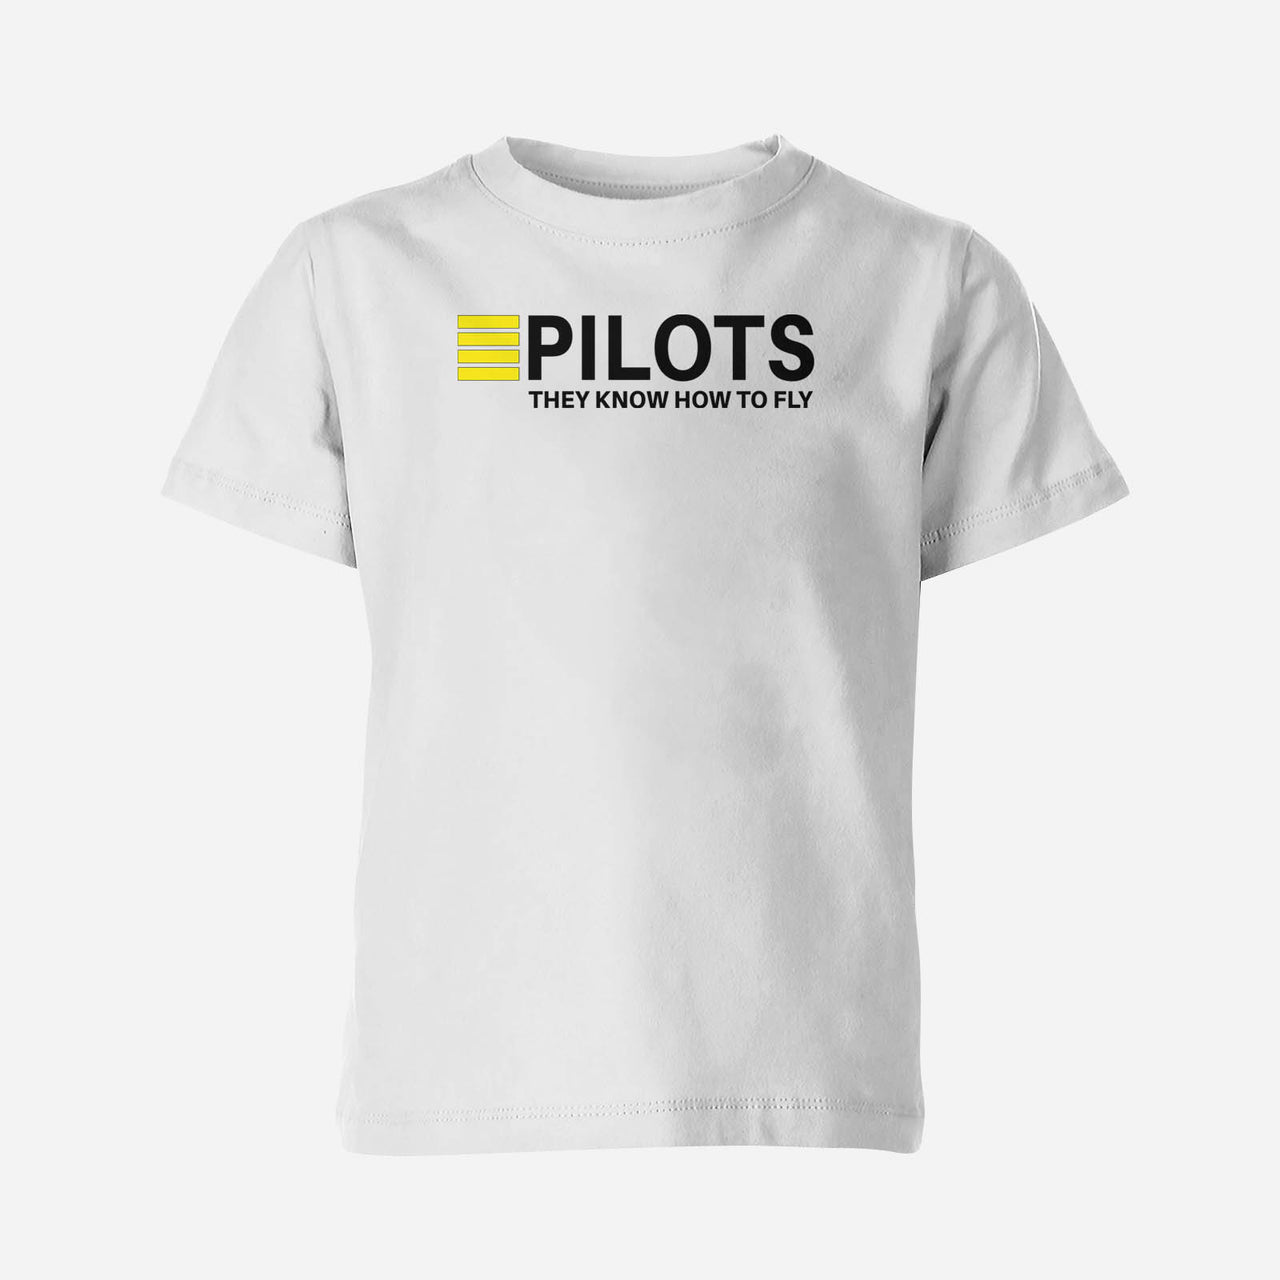 Pilots They Know How To Fly Designed Children T-Shirts